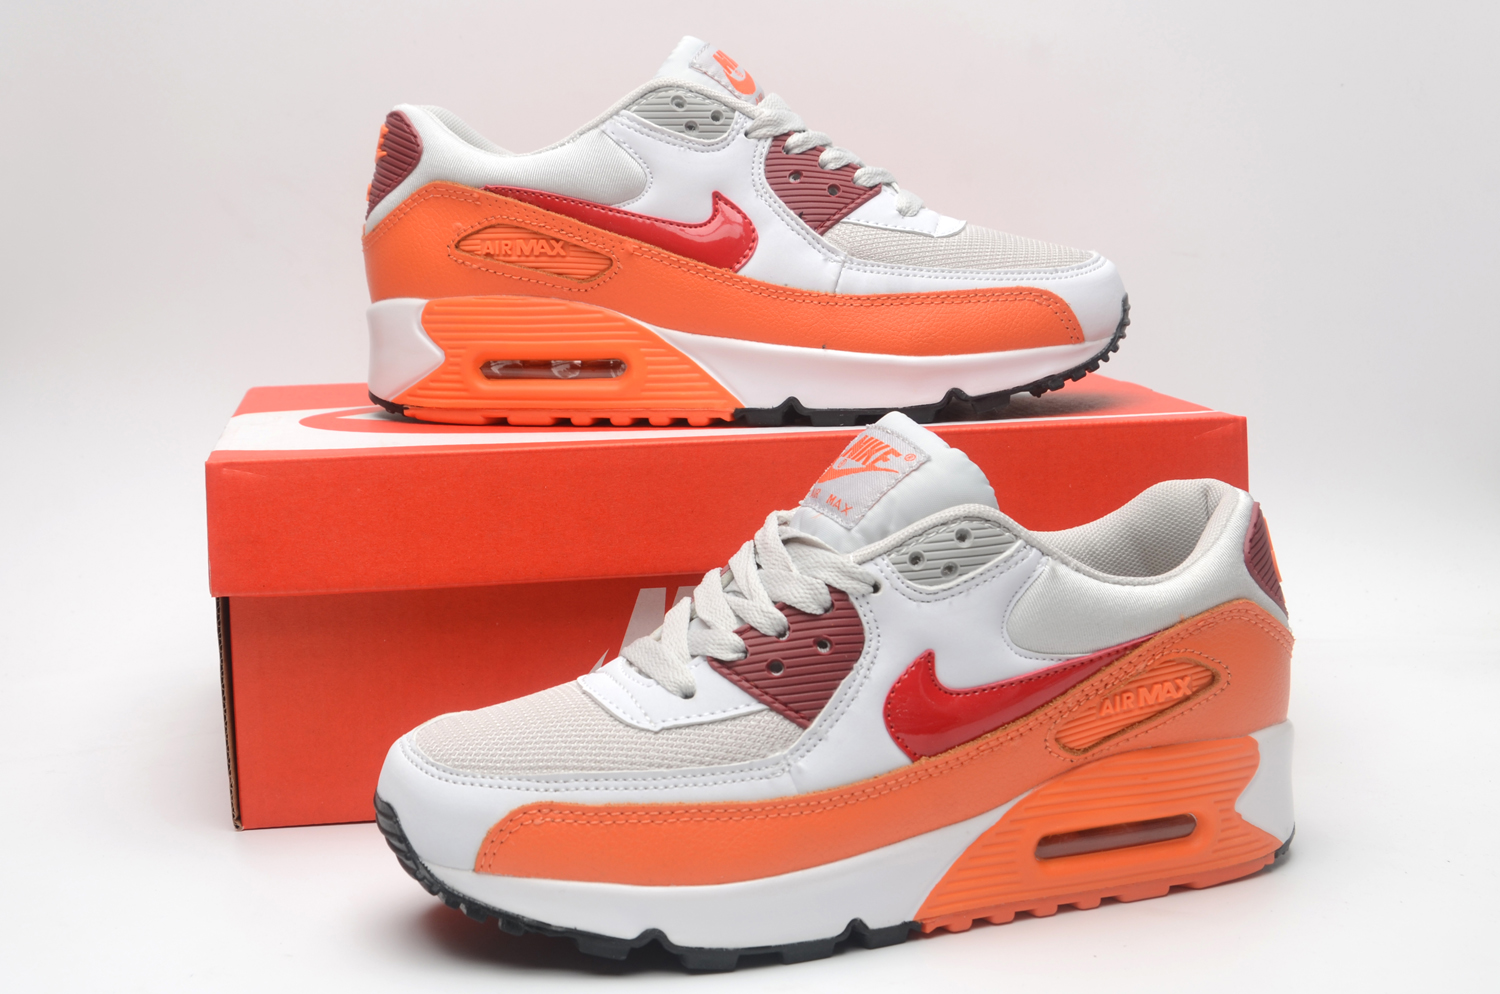 Men's Running weapon Air Max 90 Shoes 045